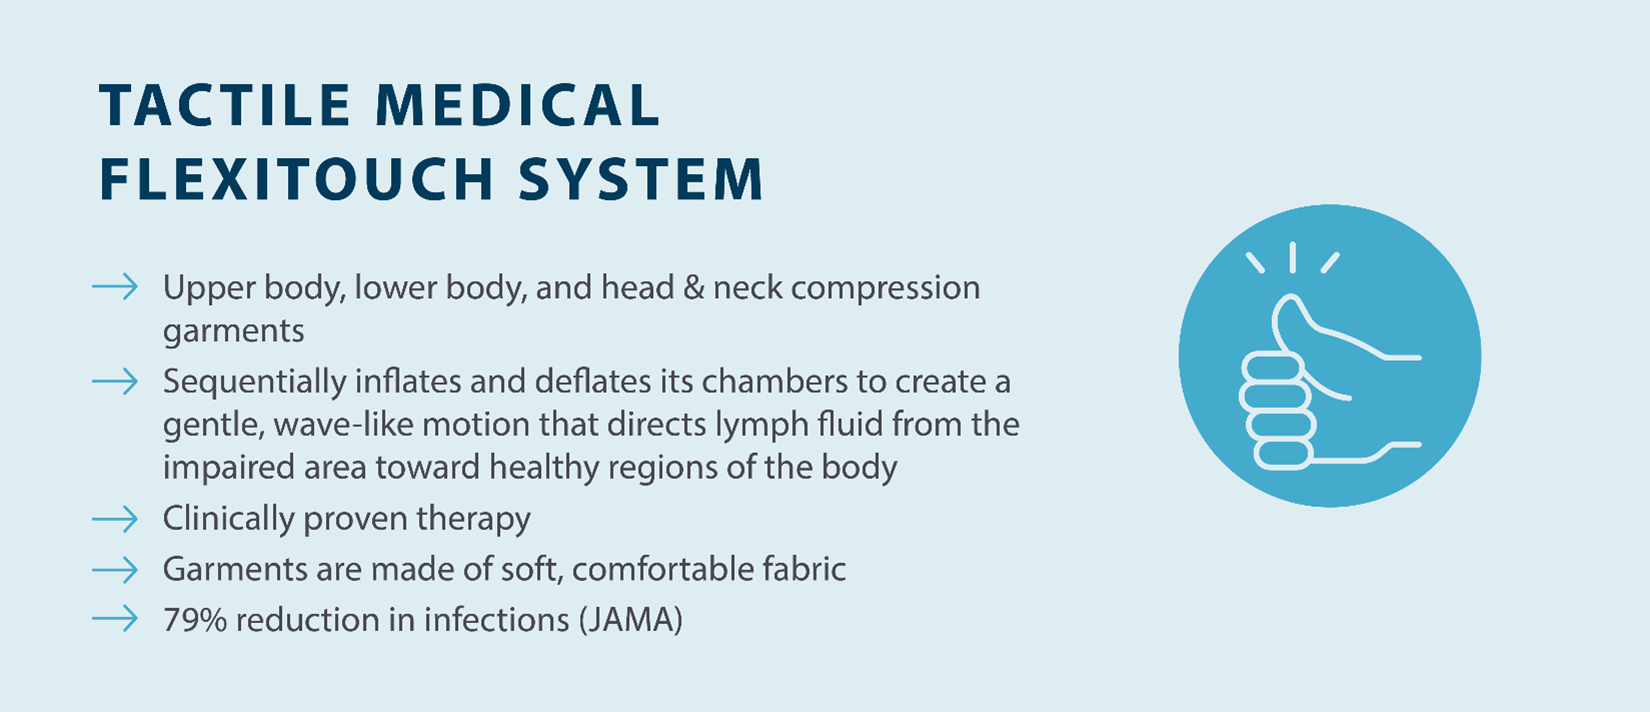 Tactile Medical Flexitouch system upper body, lower body and head and neck compression garments, sequentially inflates and deflates its chambers to create a gentle, wave like motion that directs lymph fluid from the impaired area toward healthy regions of the body, clinically proven therapy, garments are made of soft comfortable fabric, 79% reduction in infections (JAMA) Source: Tactile Medical